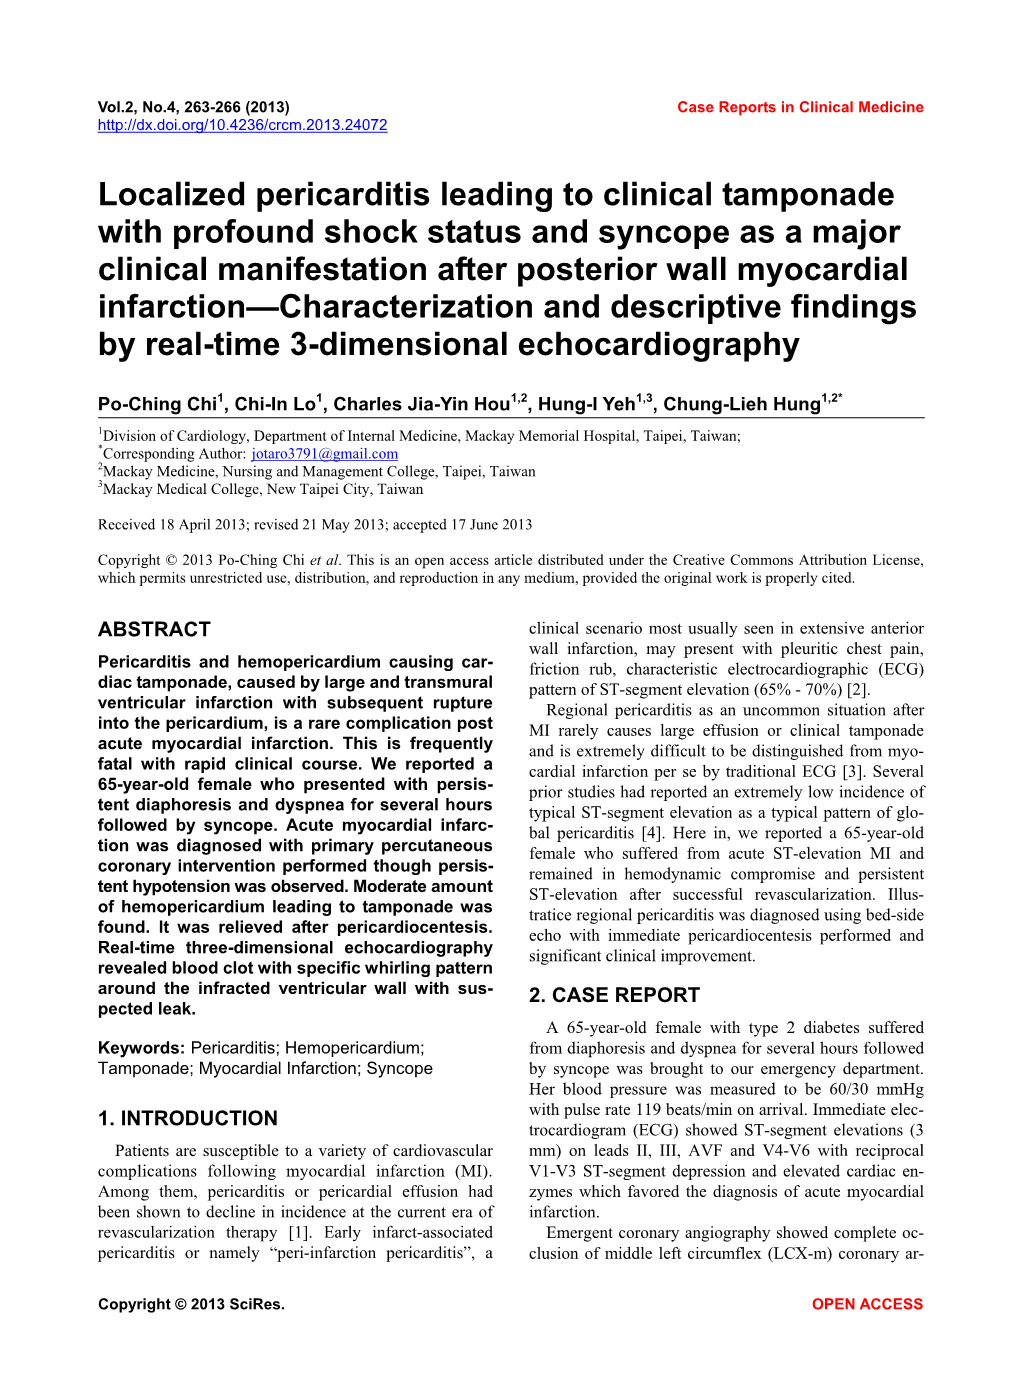 Localized Pericarditis Leading to Clinical Tamponade with Profound Shock Status and Syncope As a Major Clinical Manifestation Af